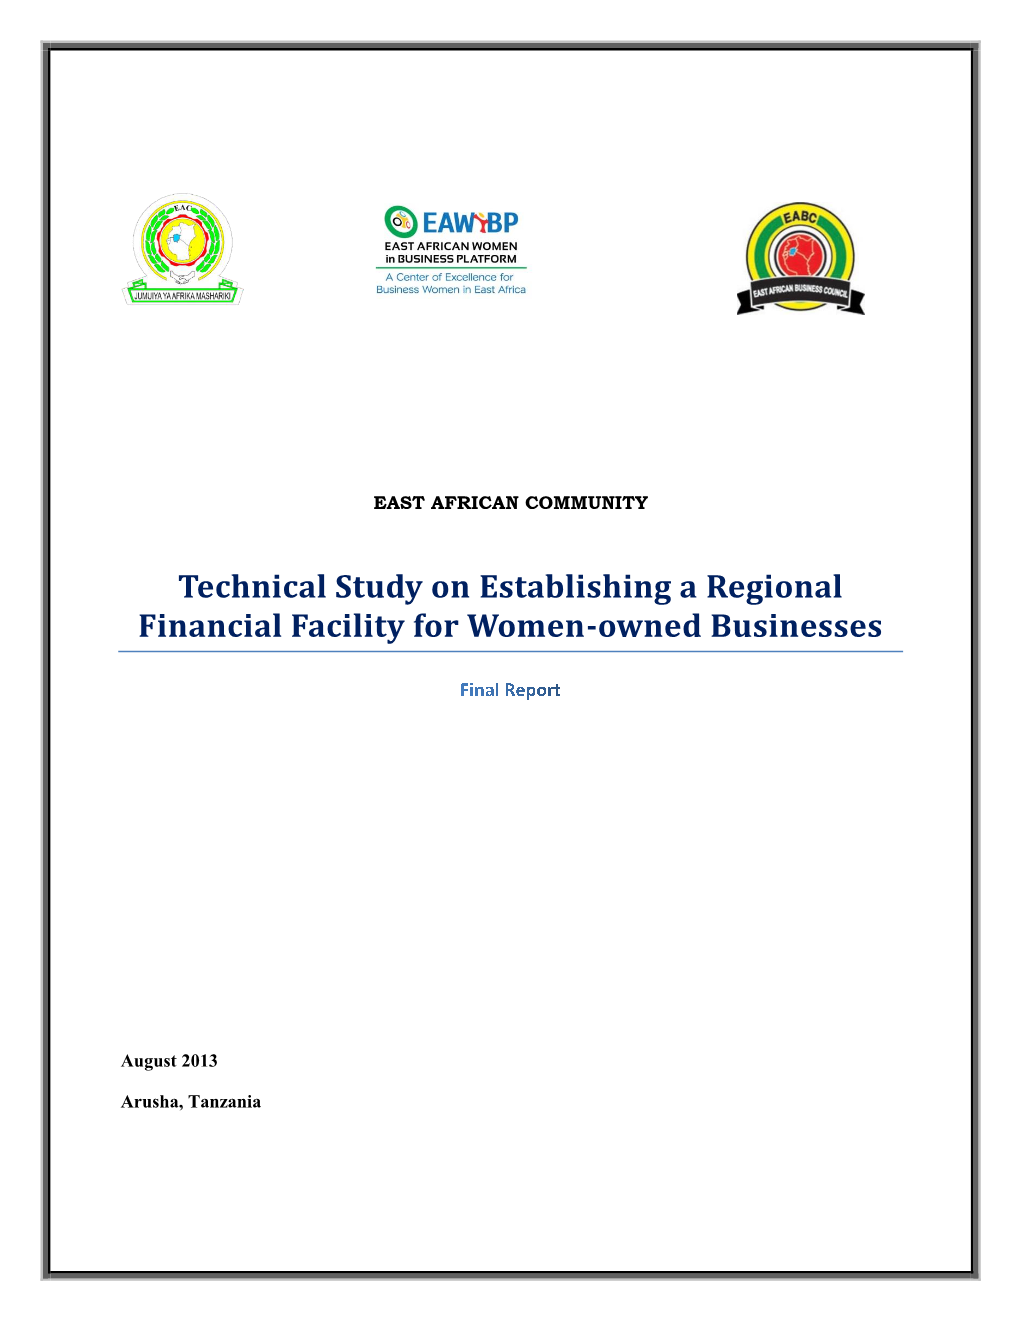 Technical Study on Establishing a Regional Financial Facility for Women-Owned Businesses